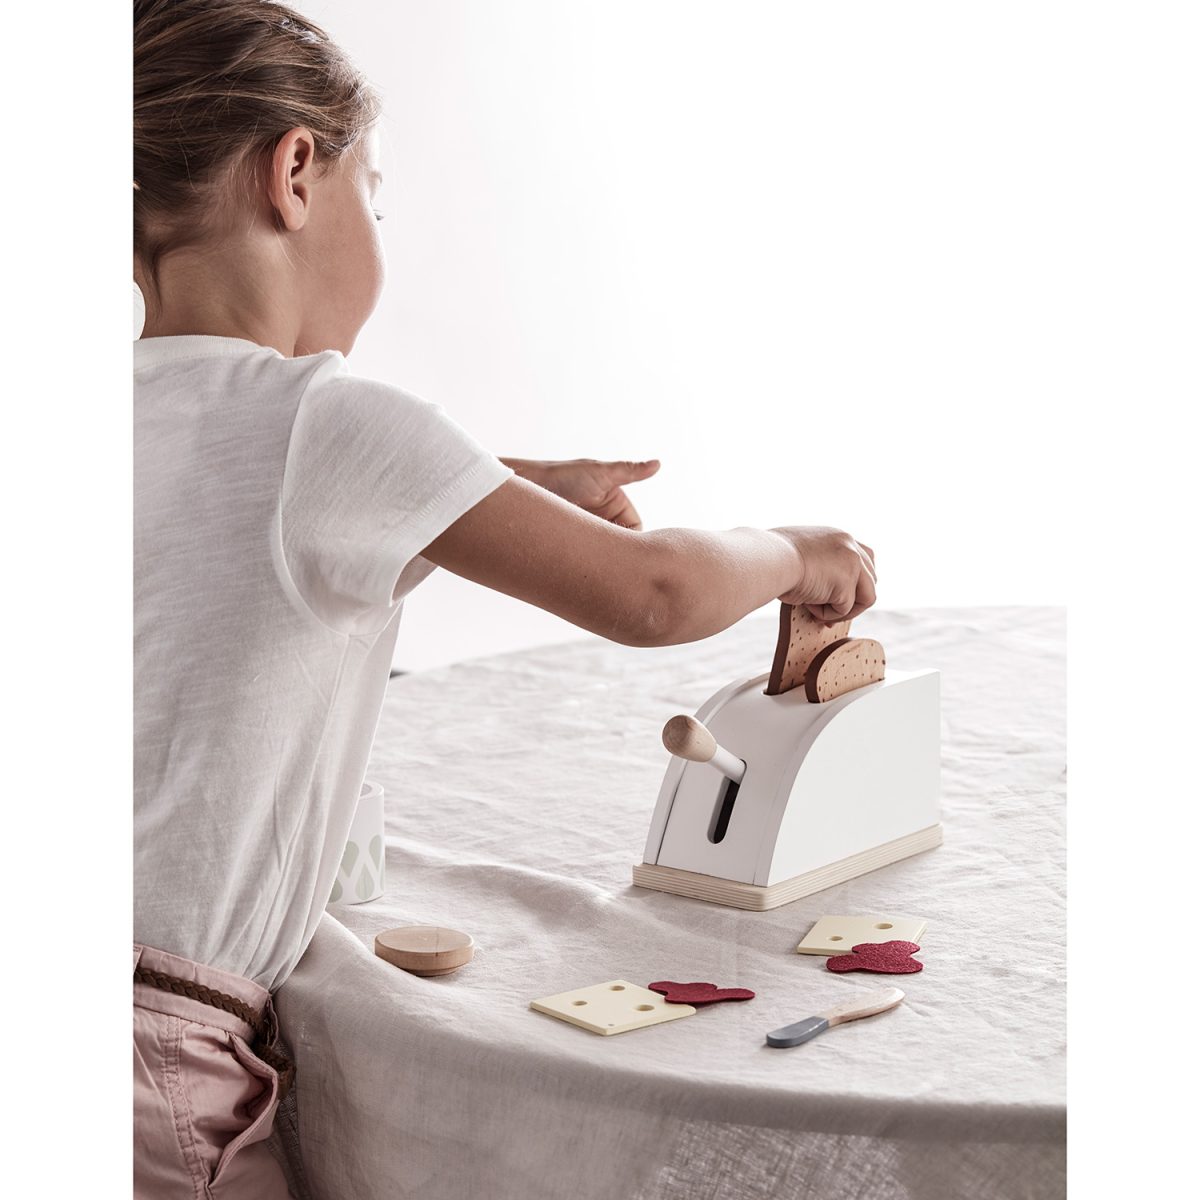 Kids concept toaster toy